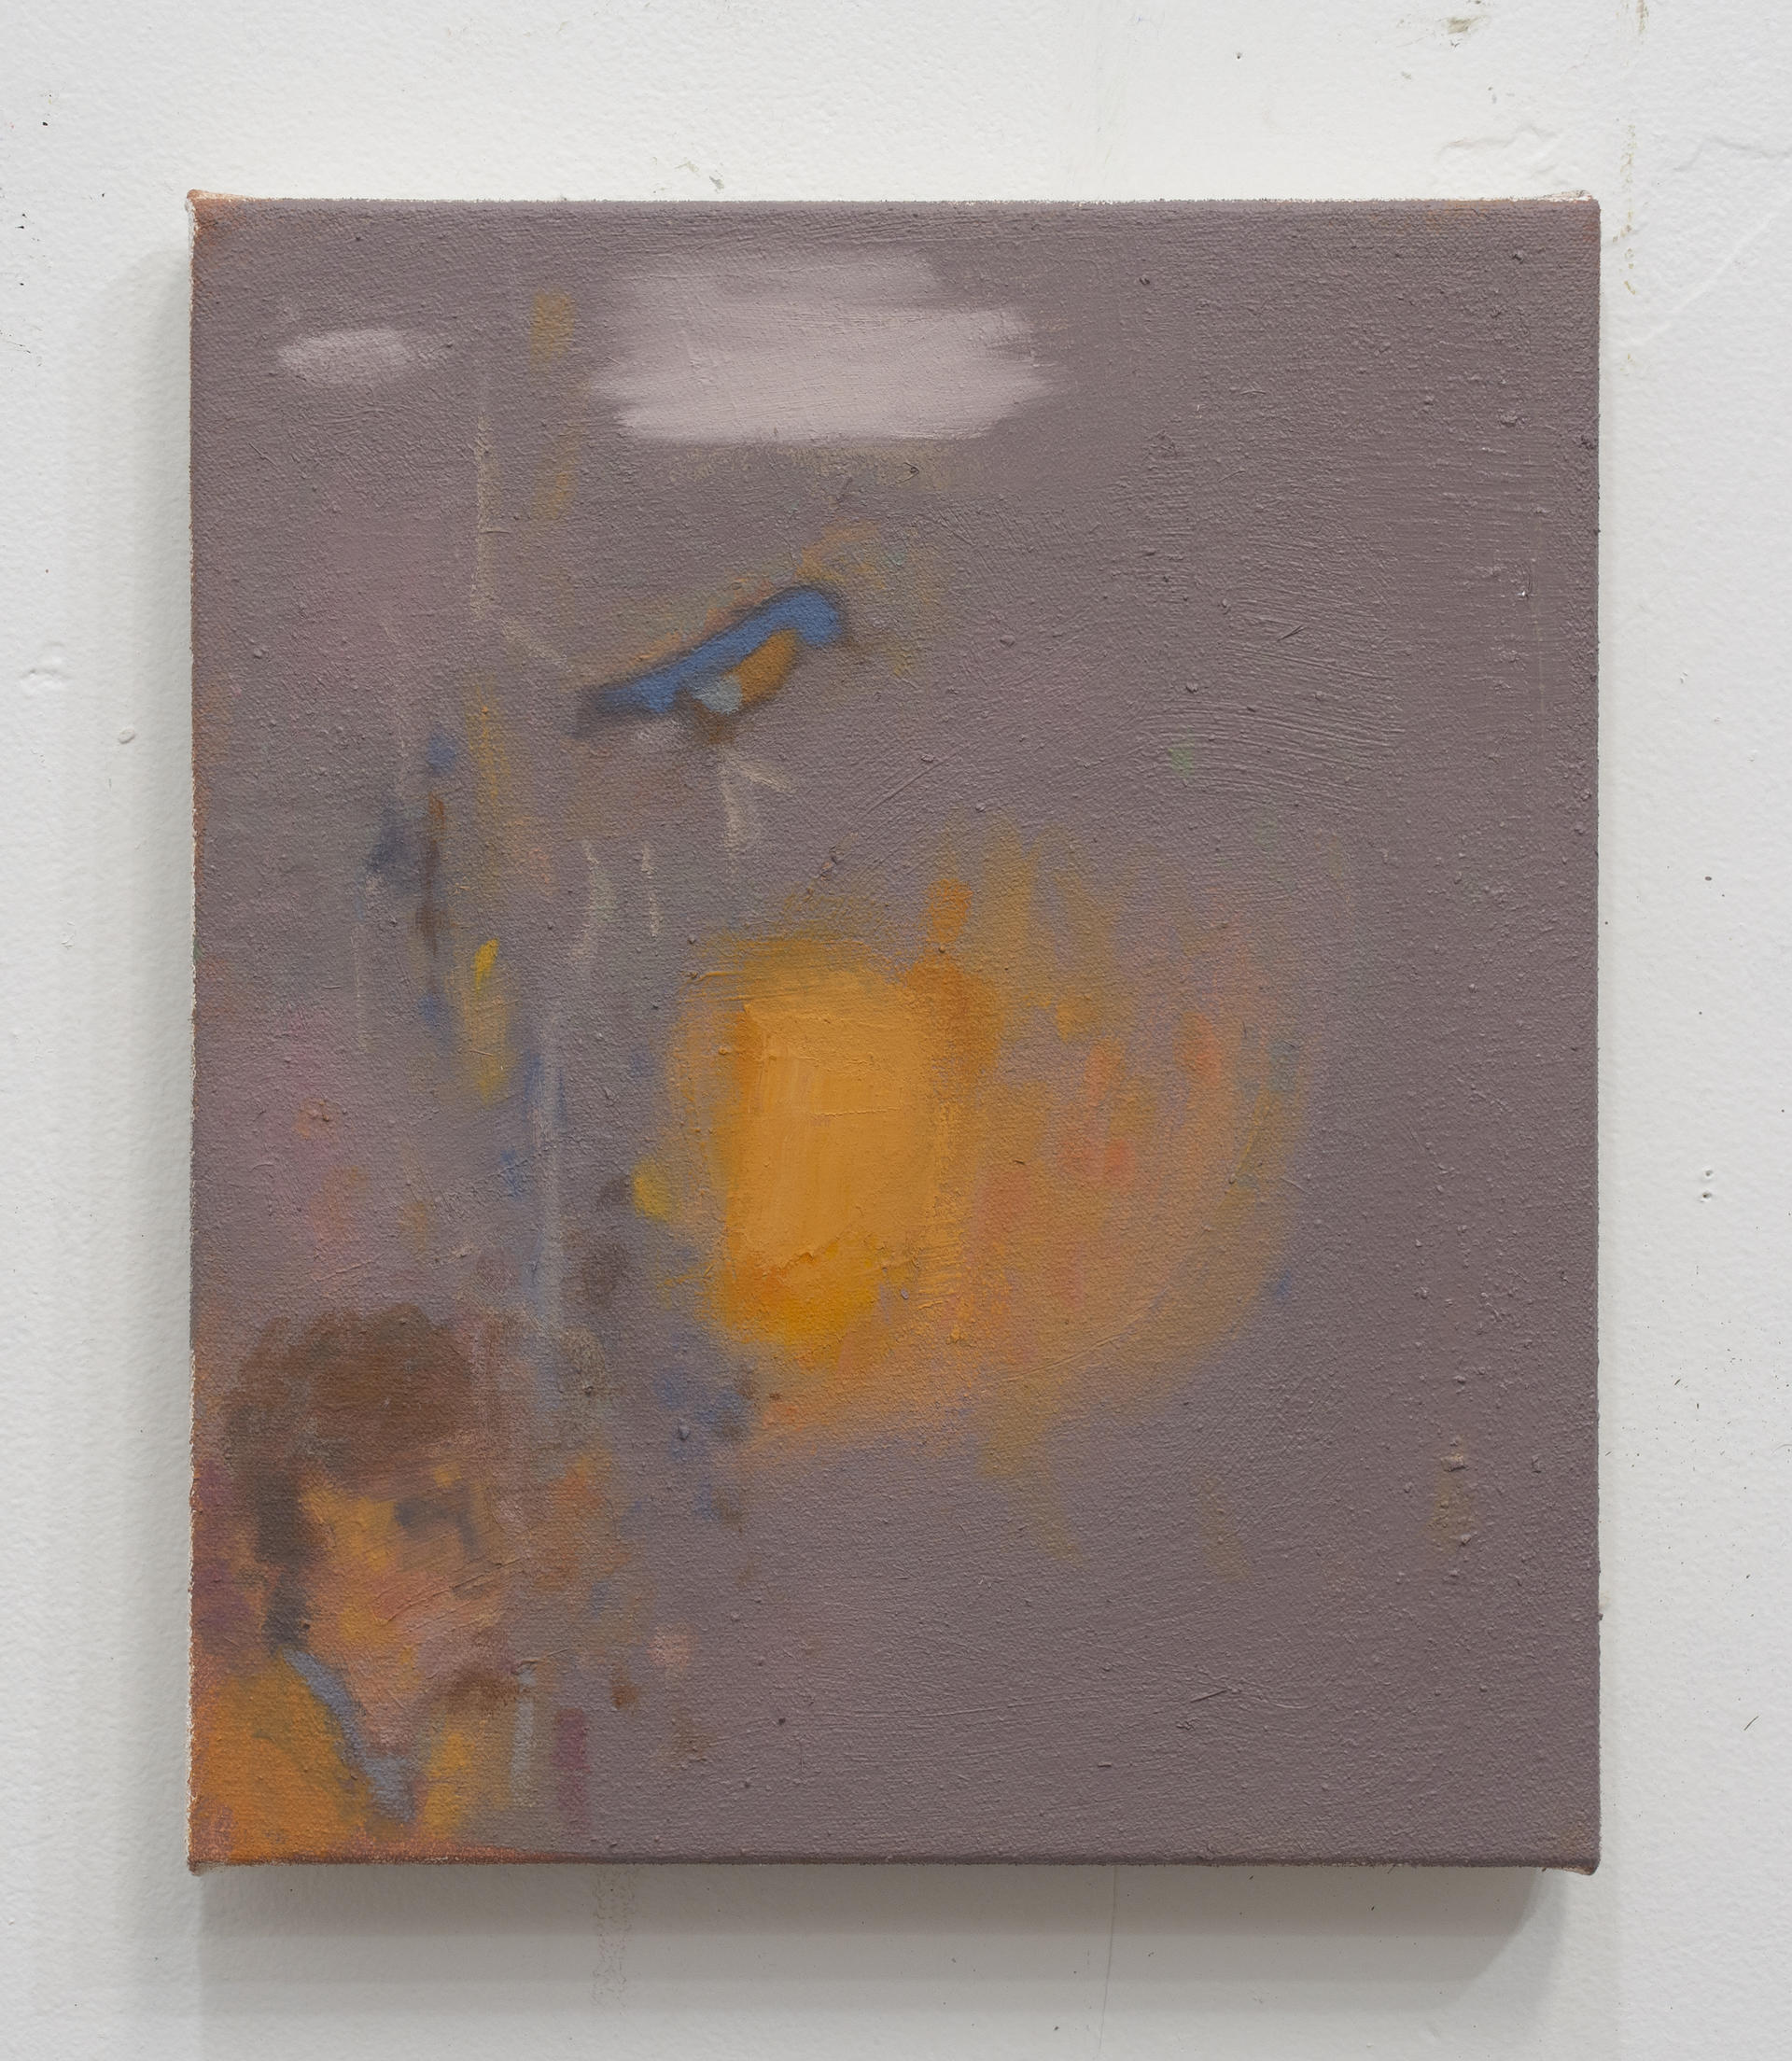 An orange and gray painting with a person and a bluebird